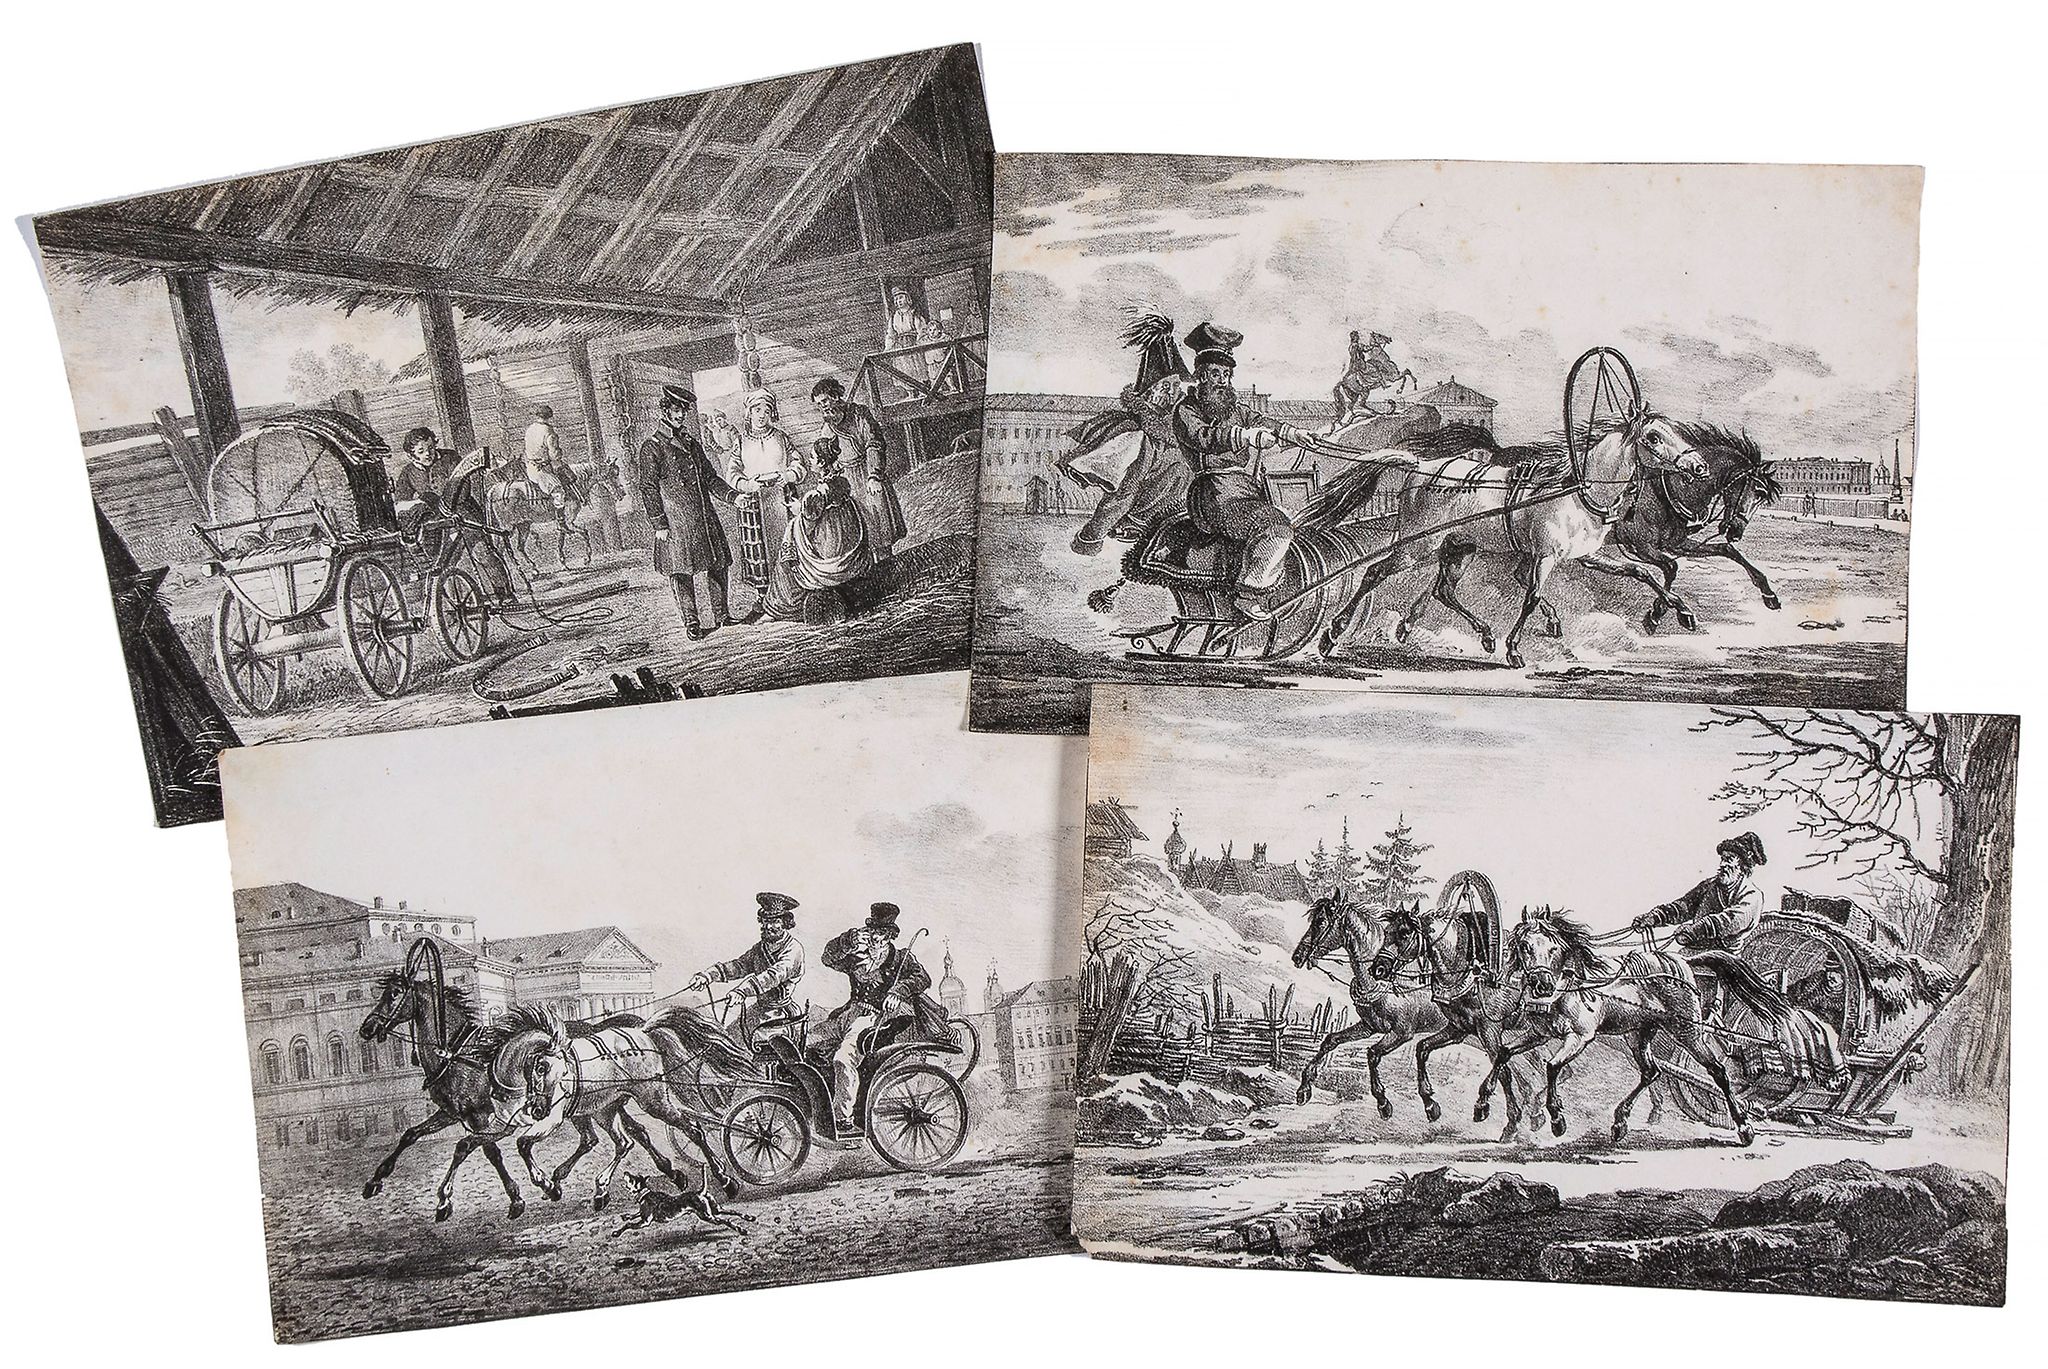 Orlowski (Aleksander) After. - A group of 8 small Russian horse and carriage or sleigh scenes,